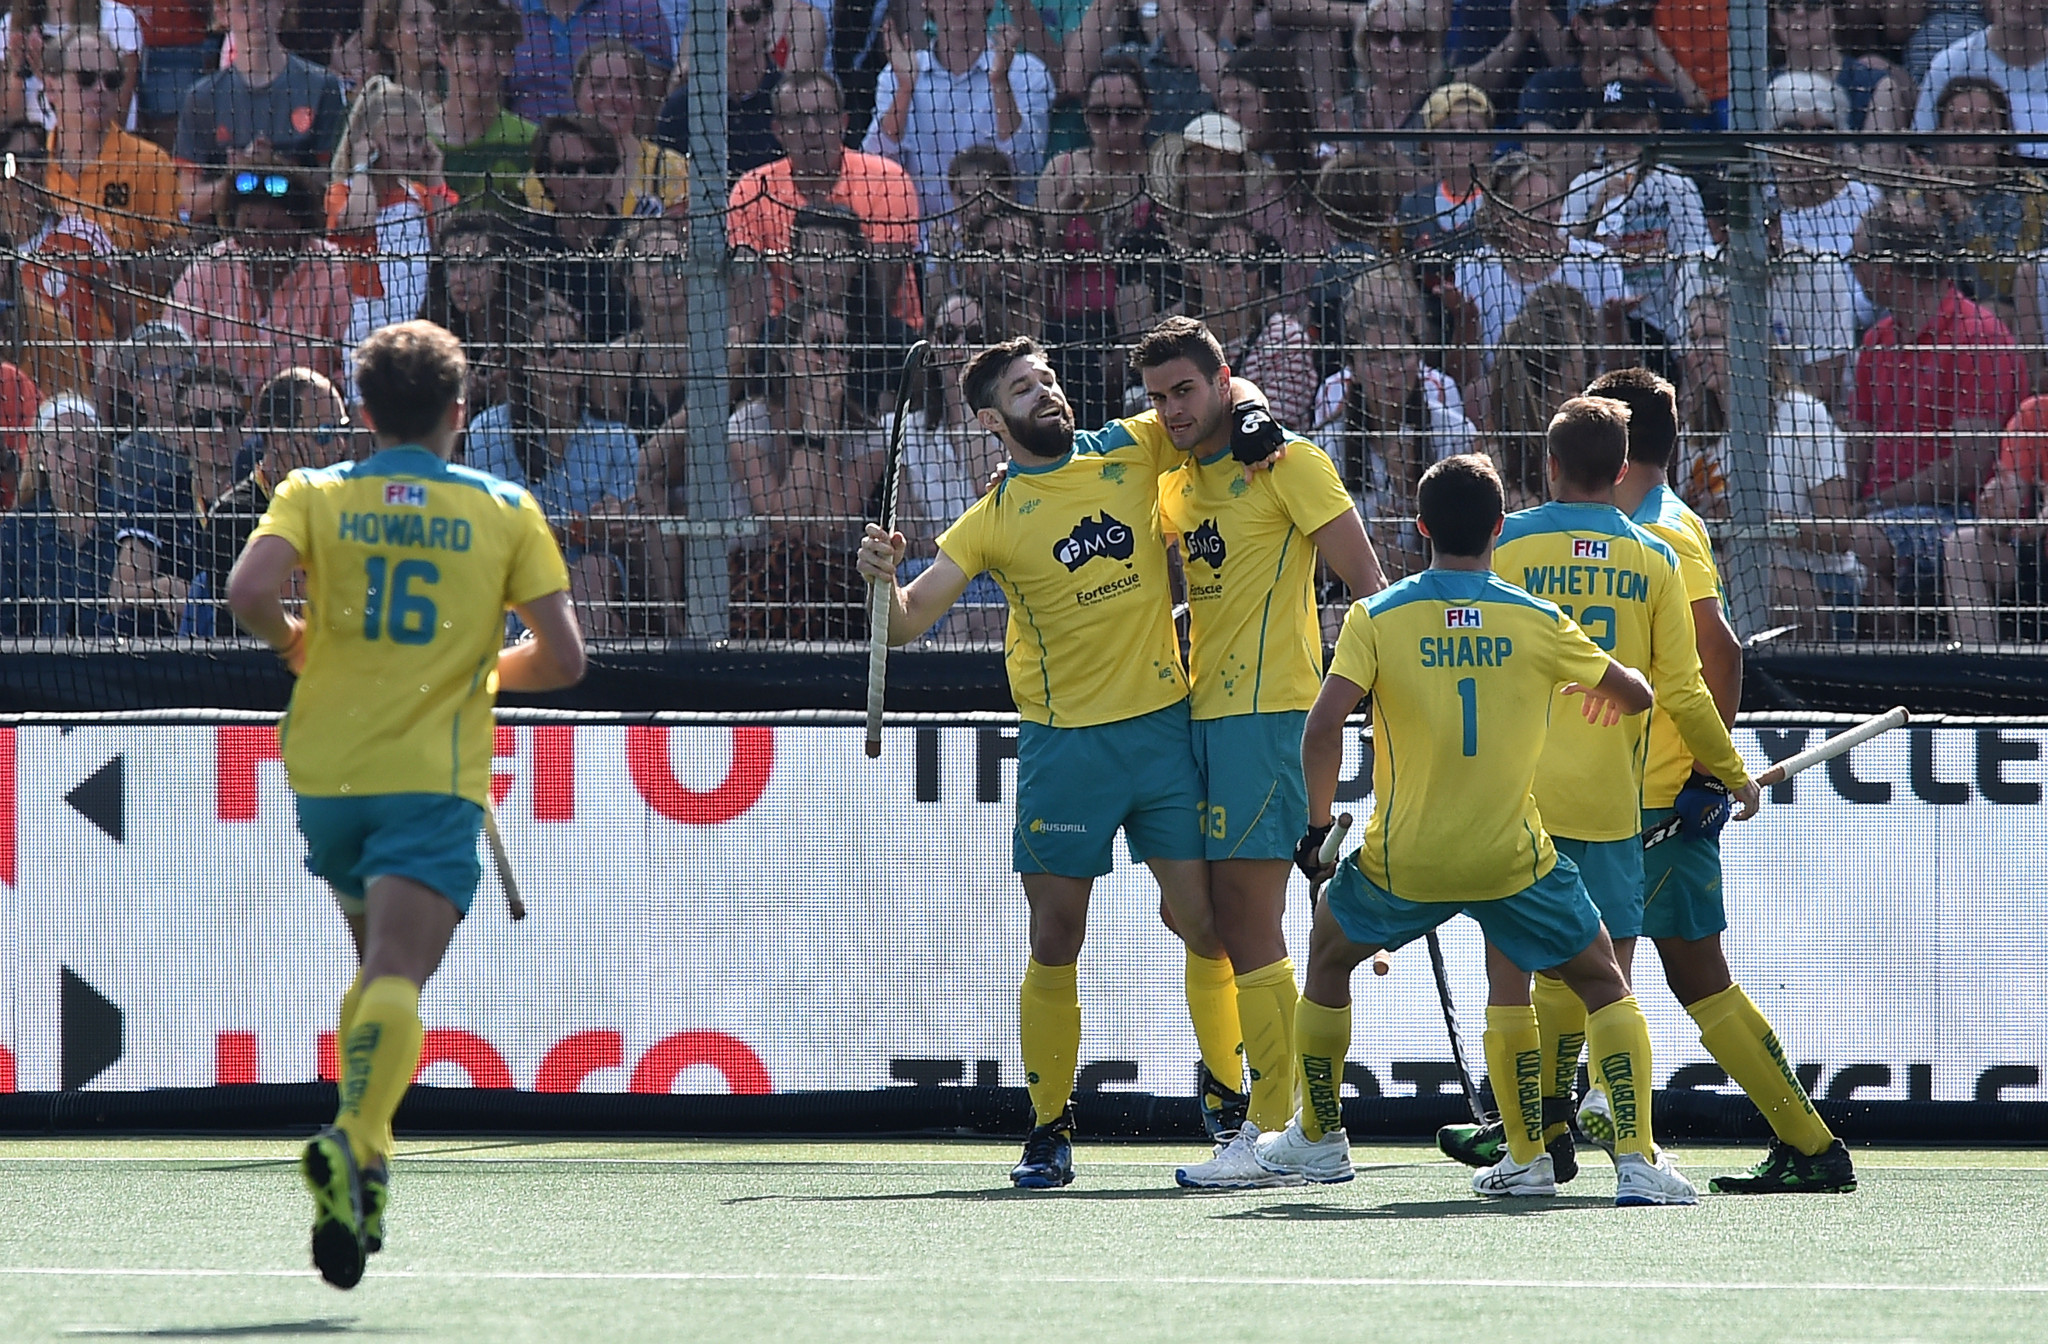 Australia men's team are 10-time defending champions at the Oceania Cup ©Getty Images